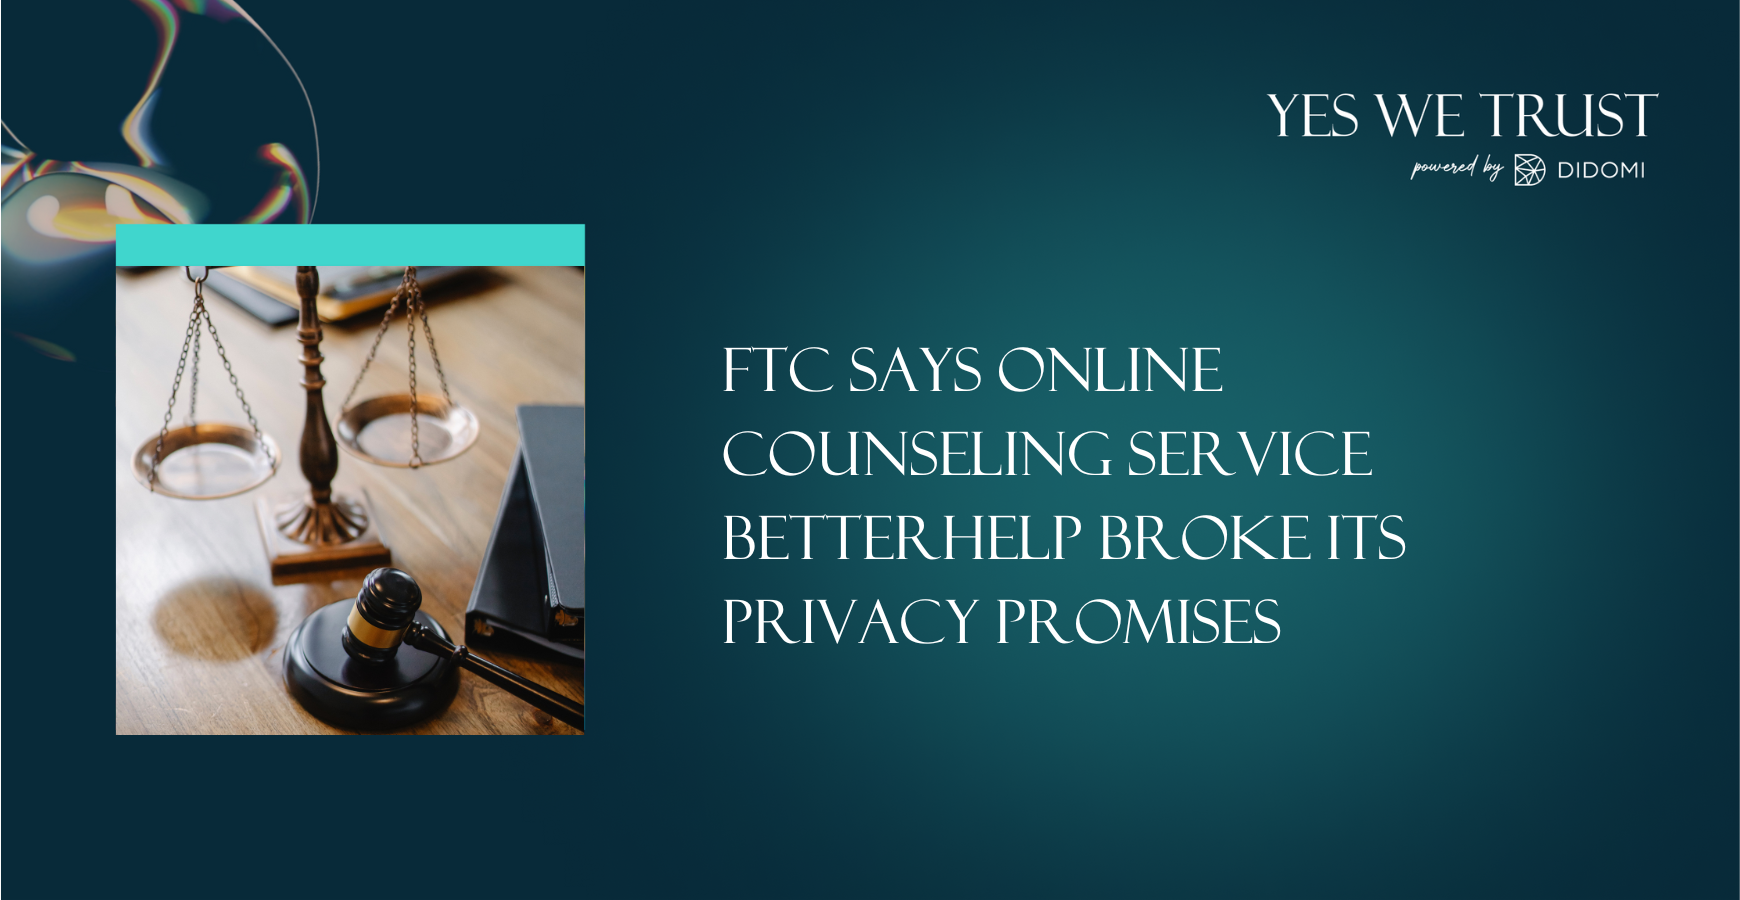 FTC says online counseling service BetterHelp broke its privacy promises